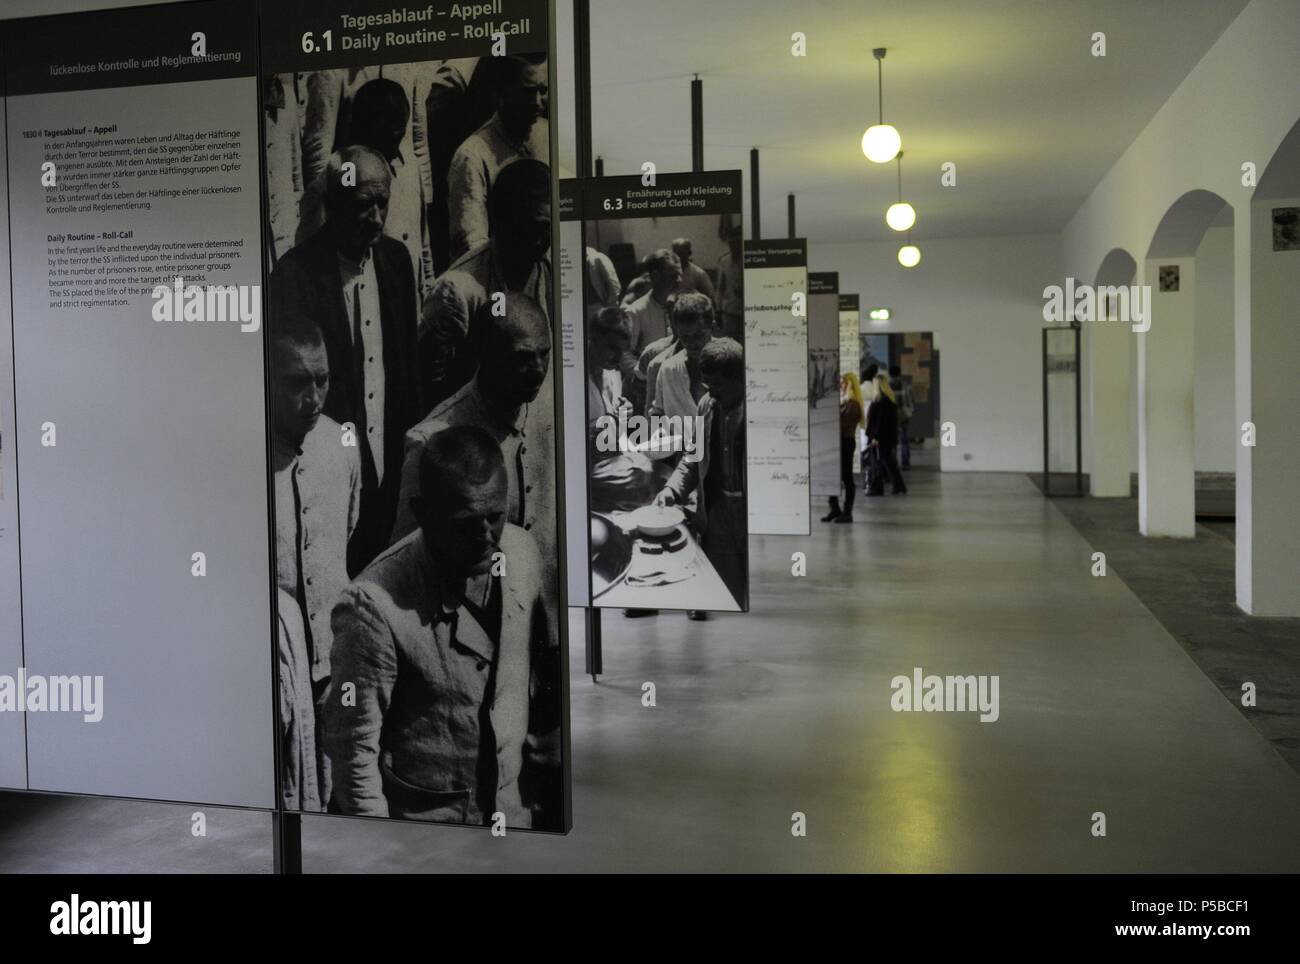 Dachau Concentration Camp. Nazi camp of prisoners opened in 1933. Interior of the Memorial Museum. Germany. Stock Photo